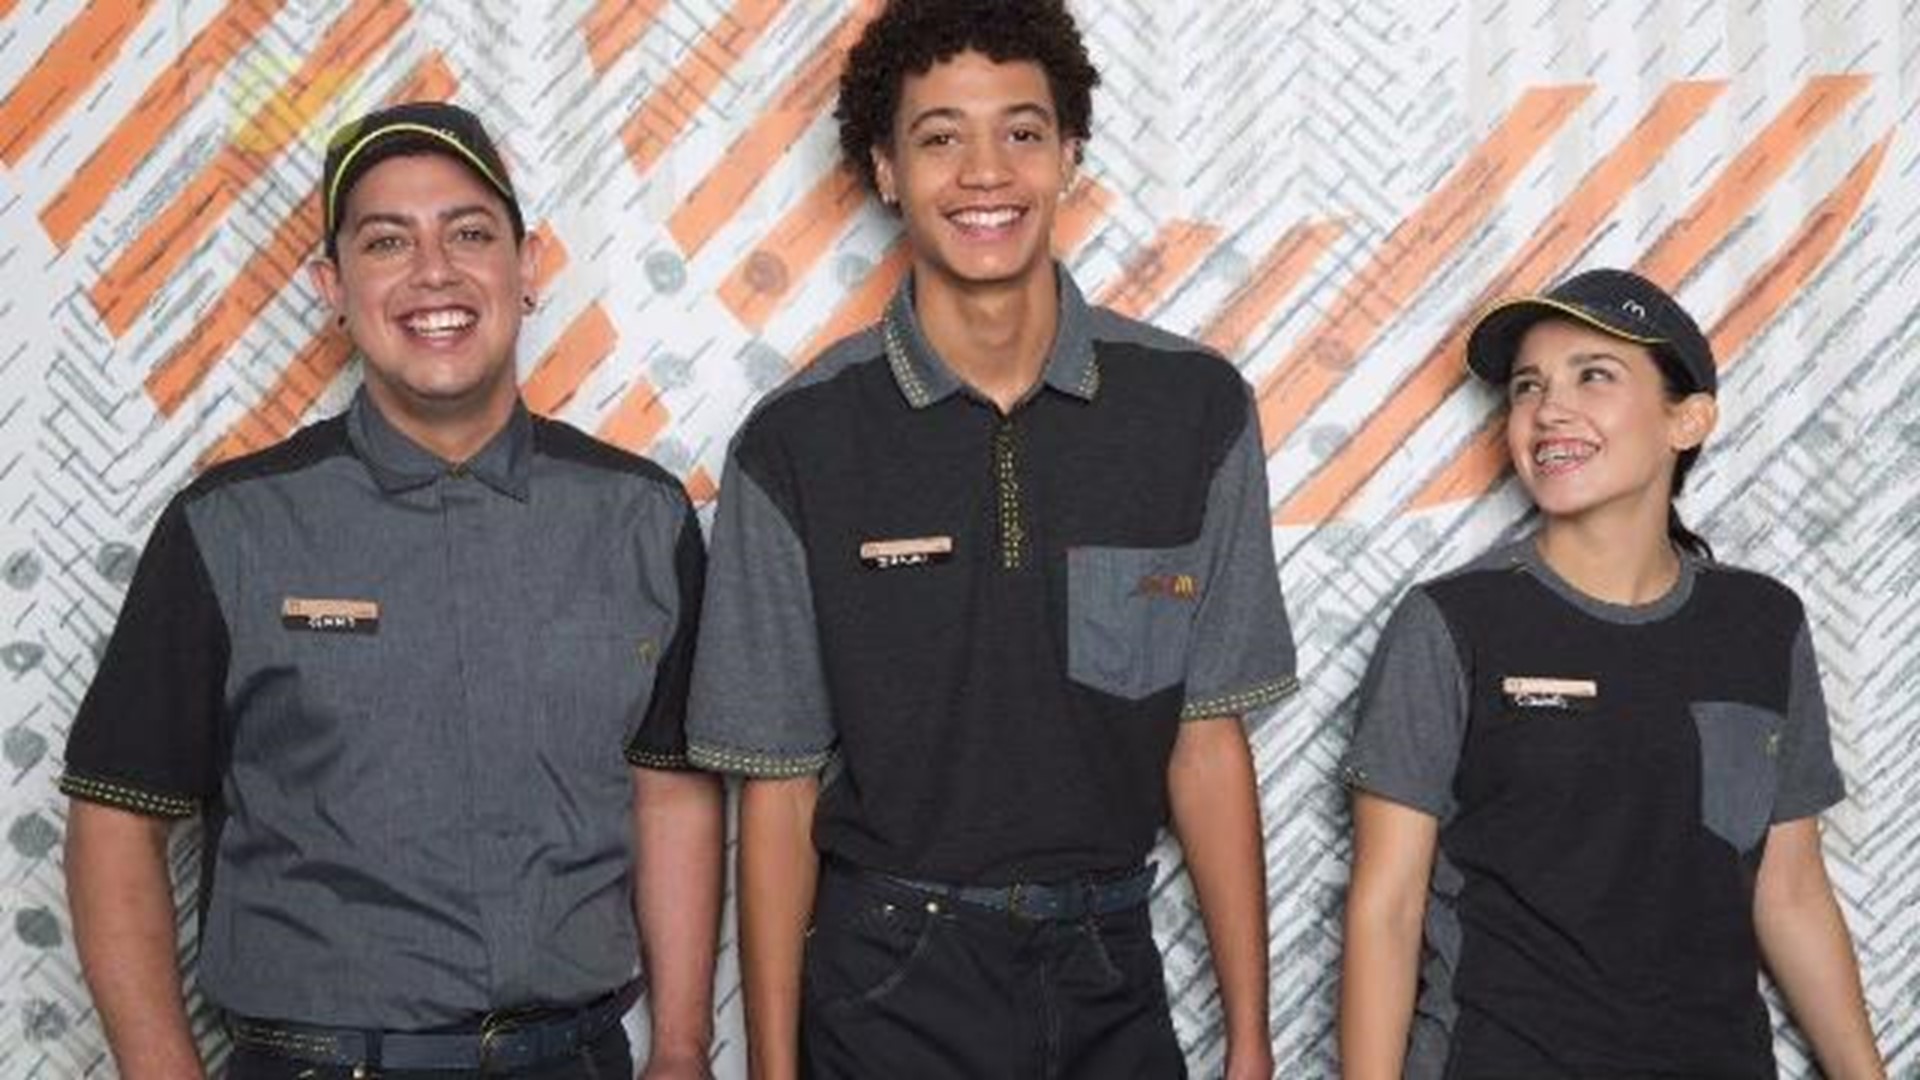 McDonald's just debuted their new uniforms and people on social media were quick to point out they look like something from a galaxy far, far away. Sean Dowling(@seandowlingtv) has more.